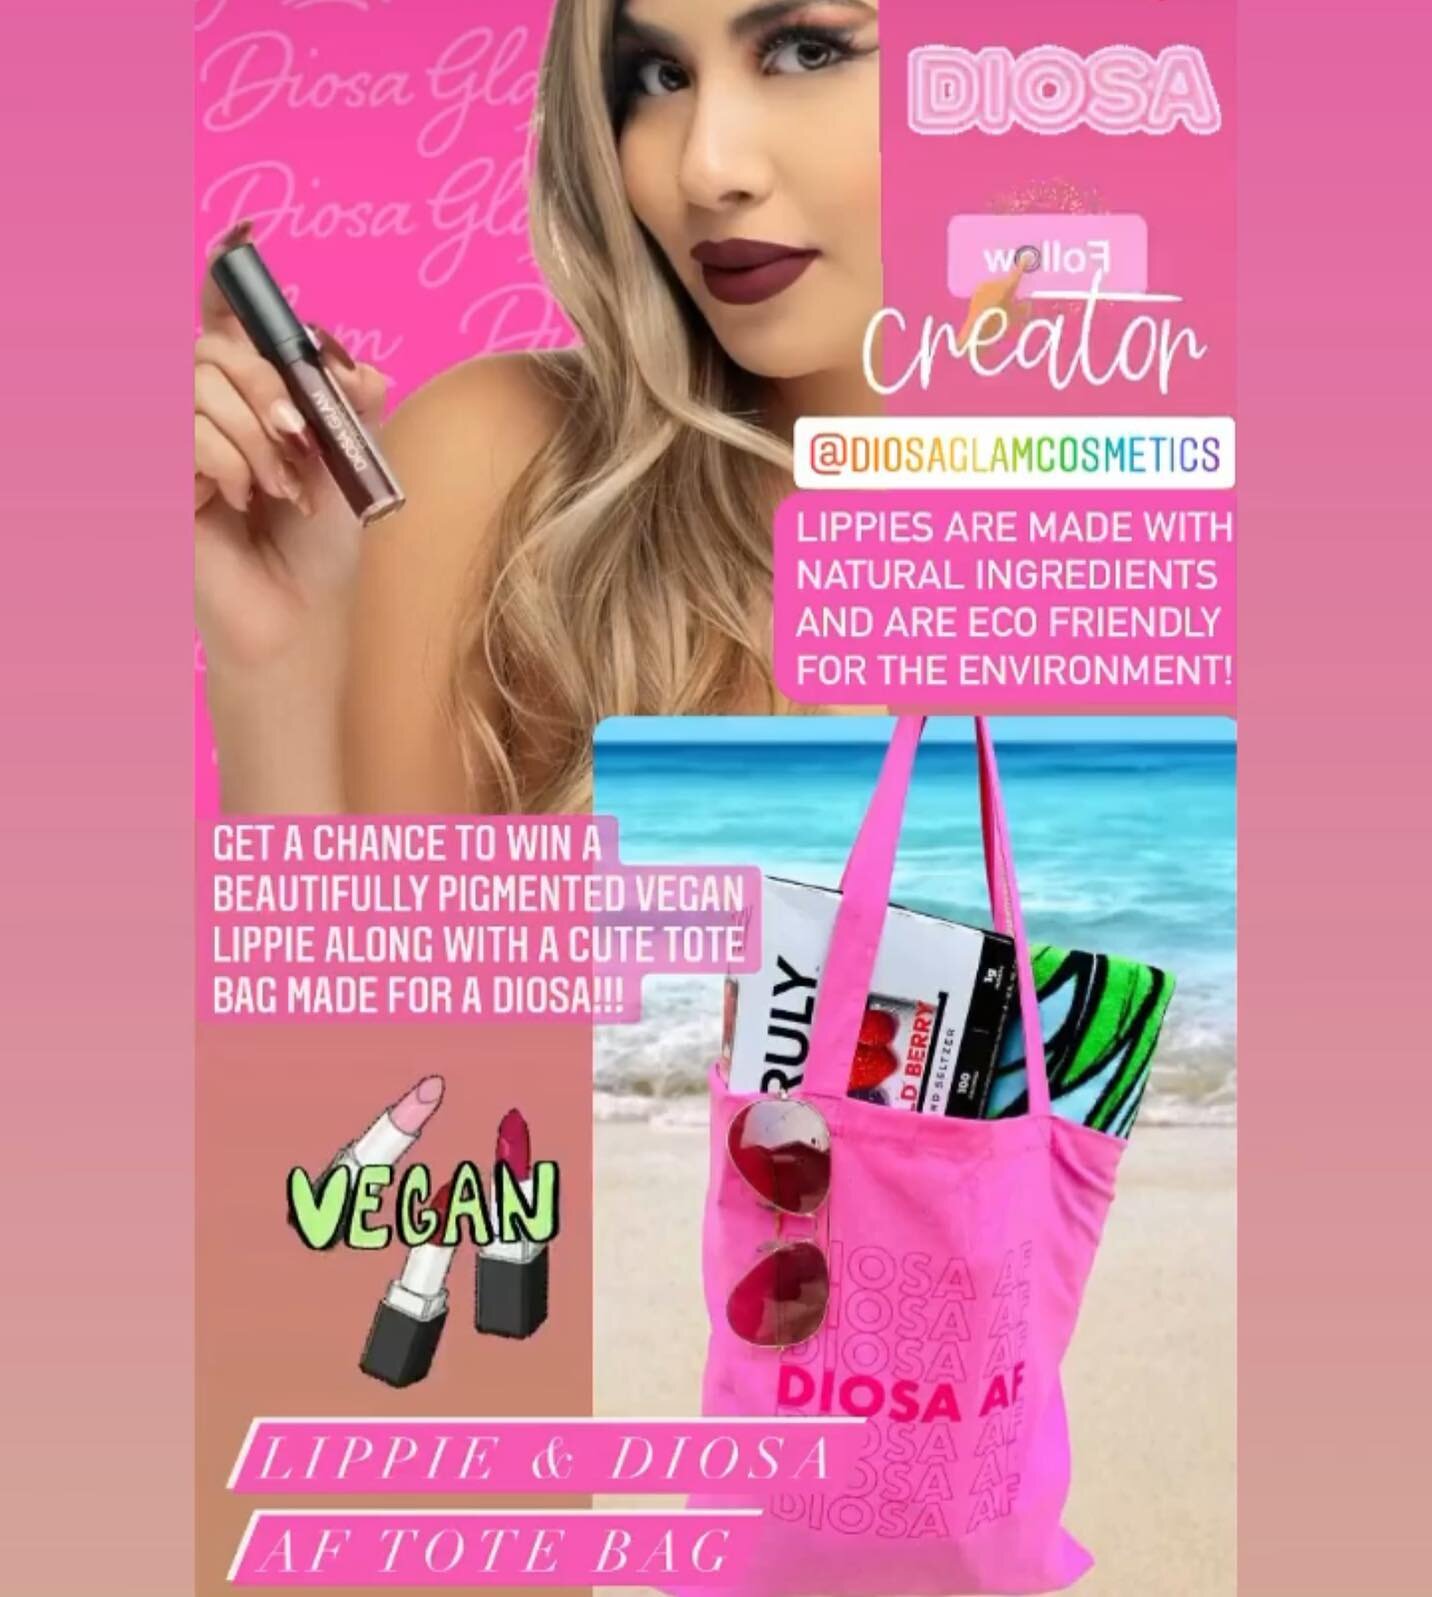 HEY DIOSAS!
Head on over to @thegoddessmercado to enter our collective GIVEAWAY for a chance to WIN a Goddess basket filled with luxury items from all #latinaentrepreneurs valued at over $1K!!!✨ THIS IS WILD!!!🔥

Prize includes DIOSA lippie and tote